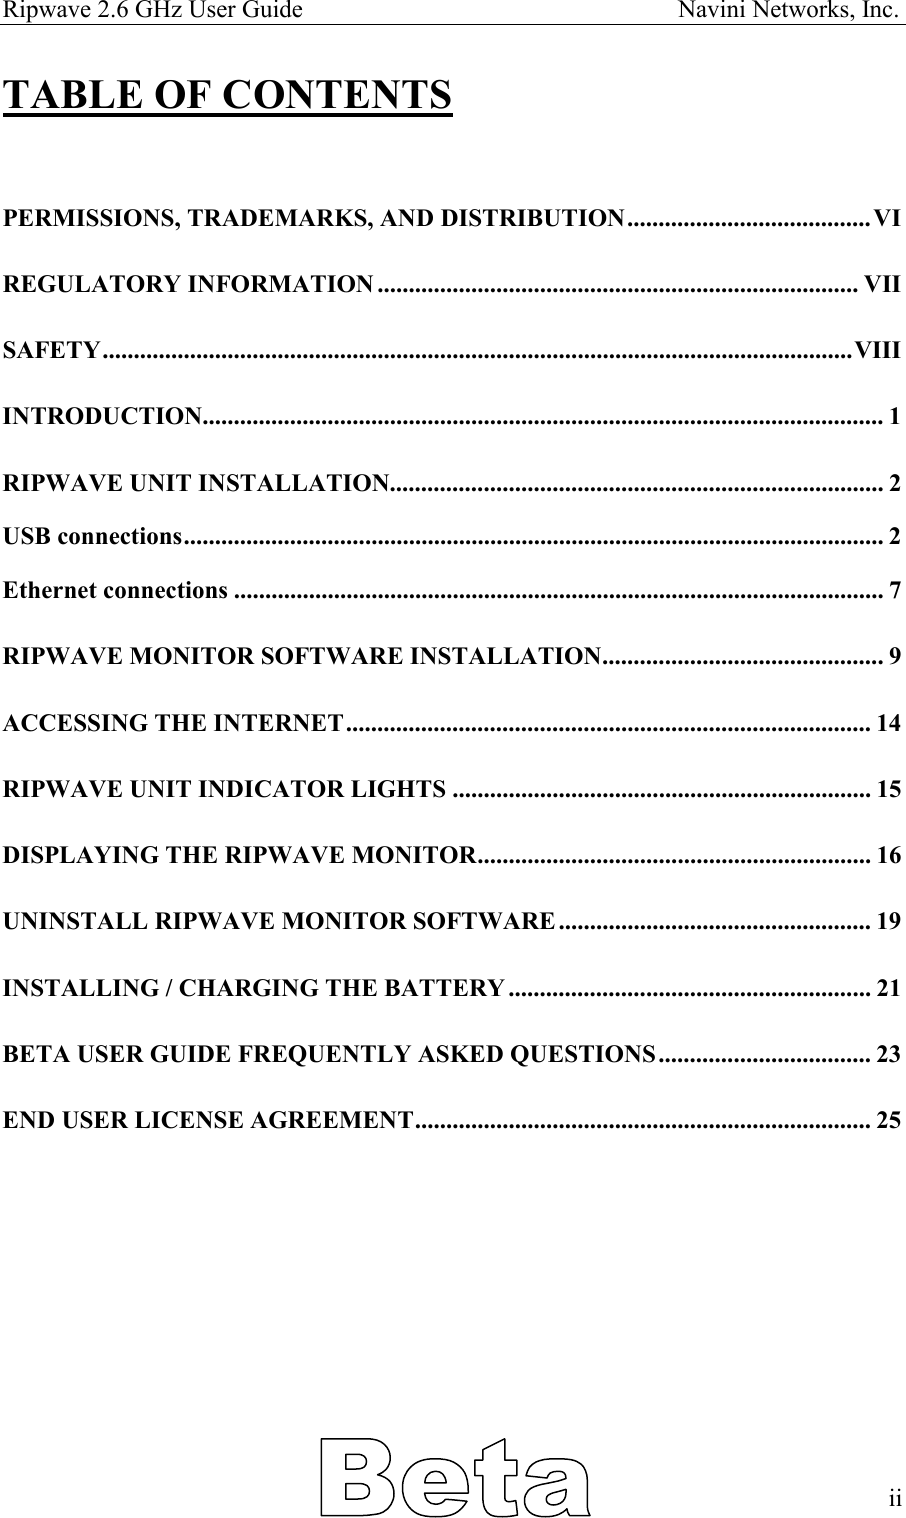 Ripwave 2.6 GHz User Guide                                                            Navini Networks, Inc. TABLE OF CONTENTS  PERMISSIONS, TRADEMARKS, AND DISTRIBUTION.......................................VI REGULATORY INFORMATION ............................................................................. VII SAFETY........................................................................................................................VIII INTRODUCTION............................................................................................................. 1 RIPWAVE UNIT INSTALLATION............................................................................... 2 USB connections................................................................................................................ 2 Ethernet connections ........................................................................................................ 7 RIPWAVE MONITOR SOFTWARE INSTALLATION............................................. 9 ACCESSING THE INTERNET.................................................................................... 14 RIPWAVE UNIT INDICATOR LIGHTS ................................................................... 15 DISPLAYING THE RIPWAVE MONITOR............................................................... 16 UNINSTALL RIPWAVE MONITOR SOFTWARE.................................................. 19 INSTALLING / CHARGING THE BATTERY.......................................................... 21 BETA USER GUIDE FREQUENTLY ASKED QUESTIONS.................................. 23 END USER LICENSE AGREEMENT......................................................................... 25            ii   